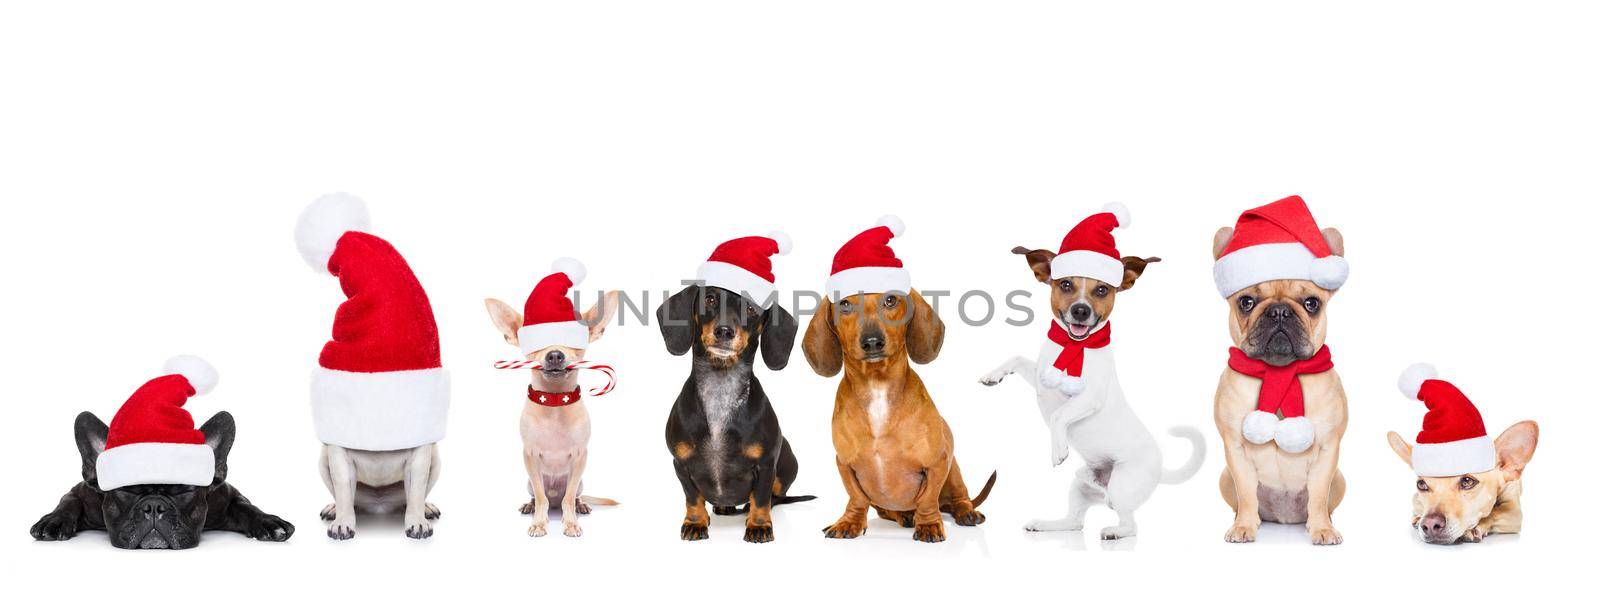 big team row of dogs on christmas holidays by Brosch